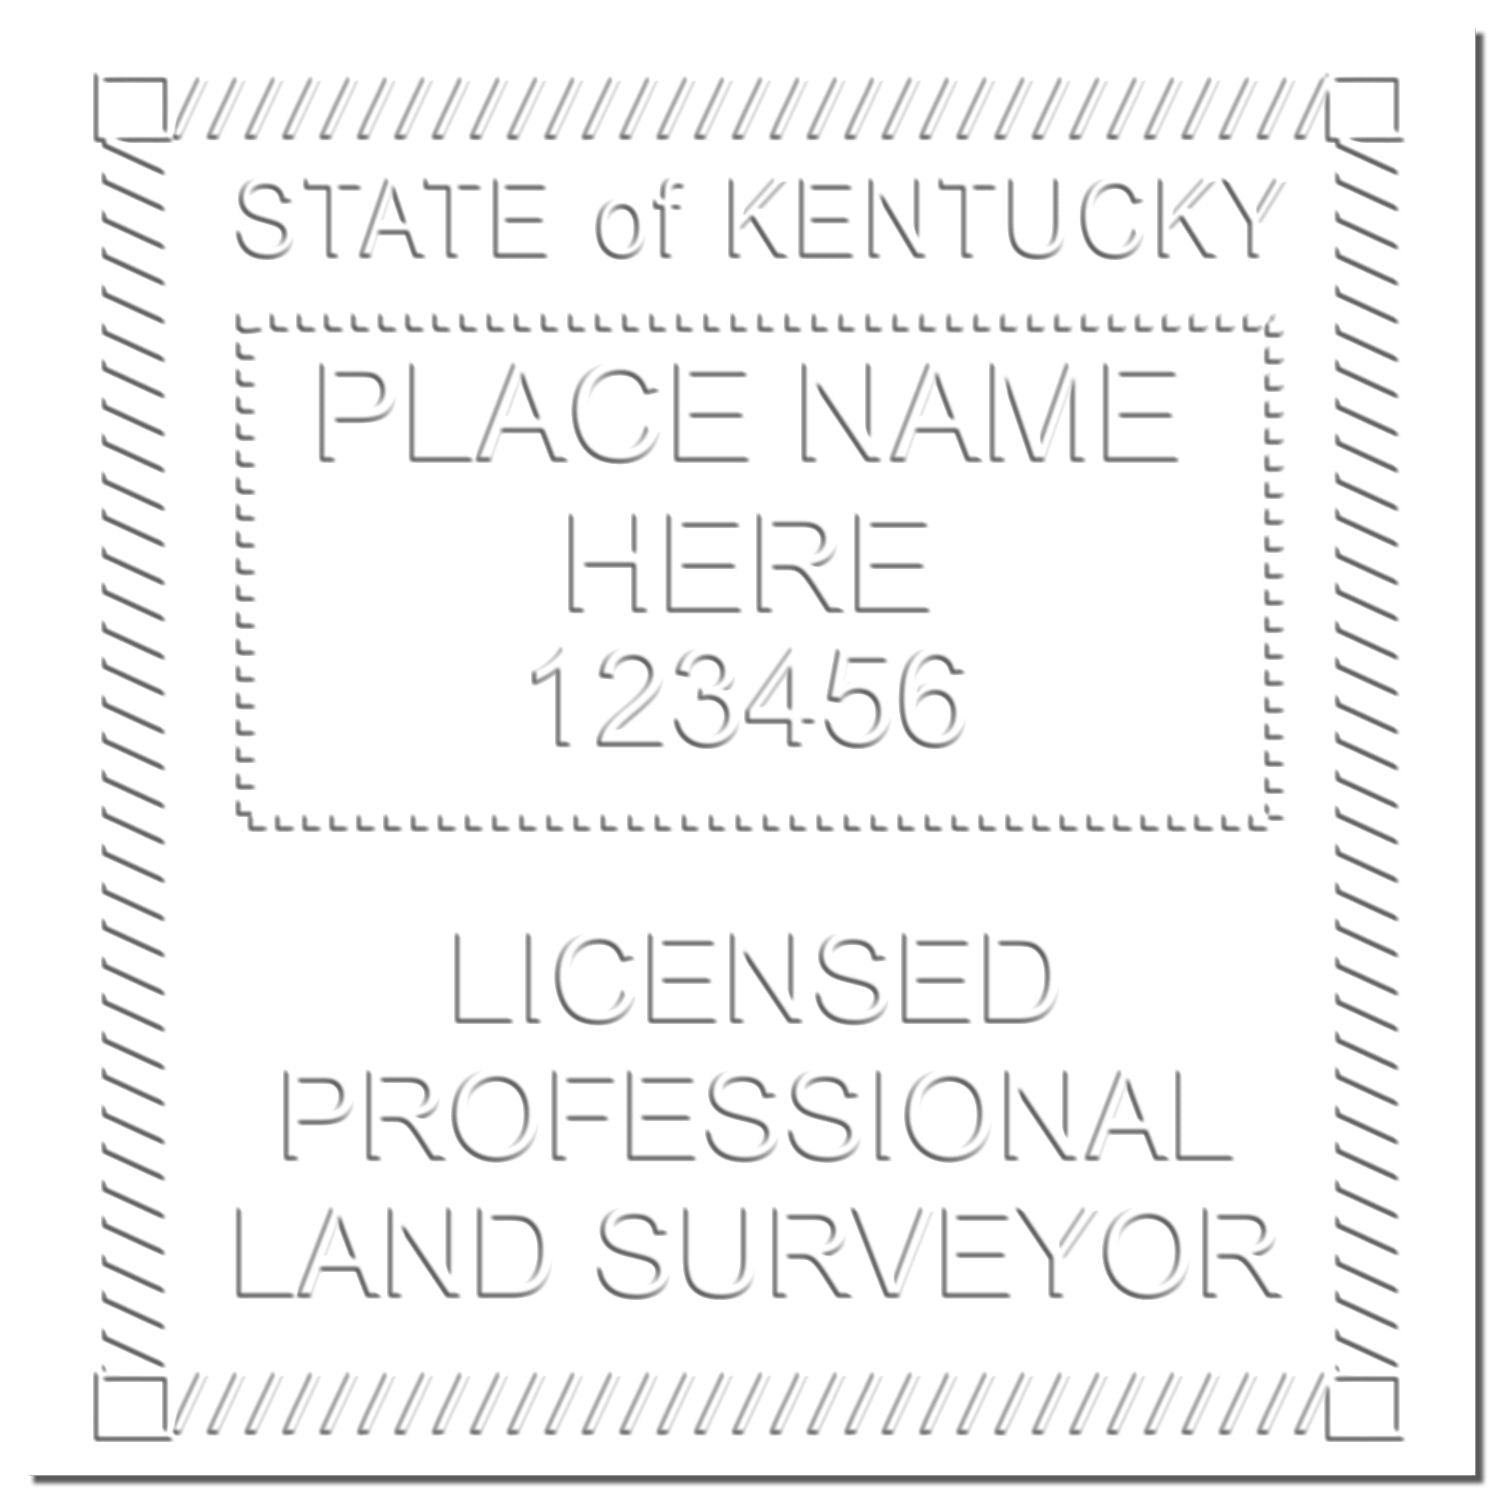 This paper is stamped with a sample imprint of the Gift Kentucky Land Surveyor Seal, signifying its quality and reliability.